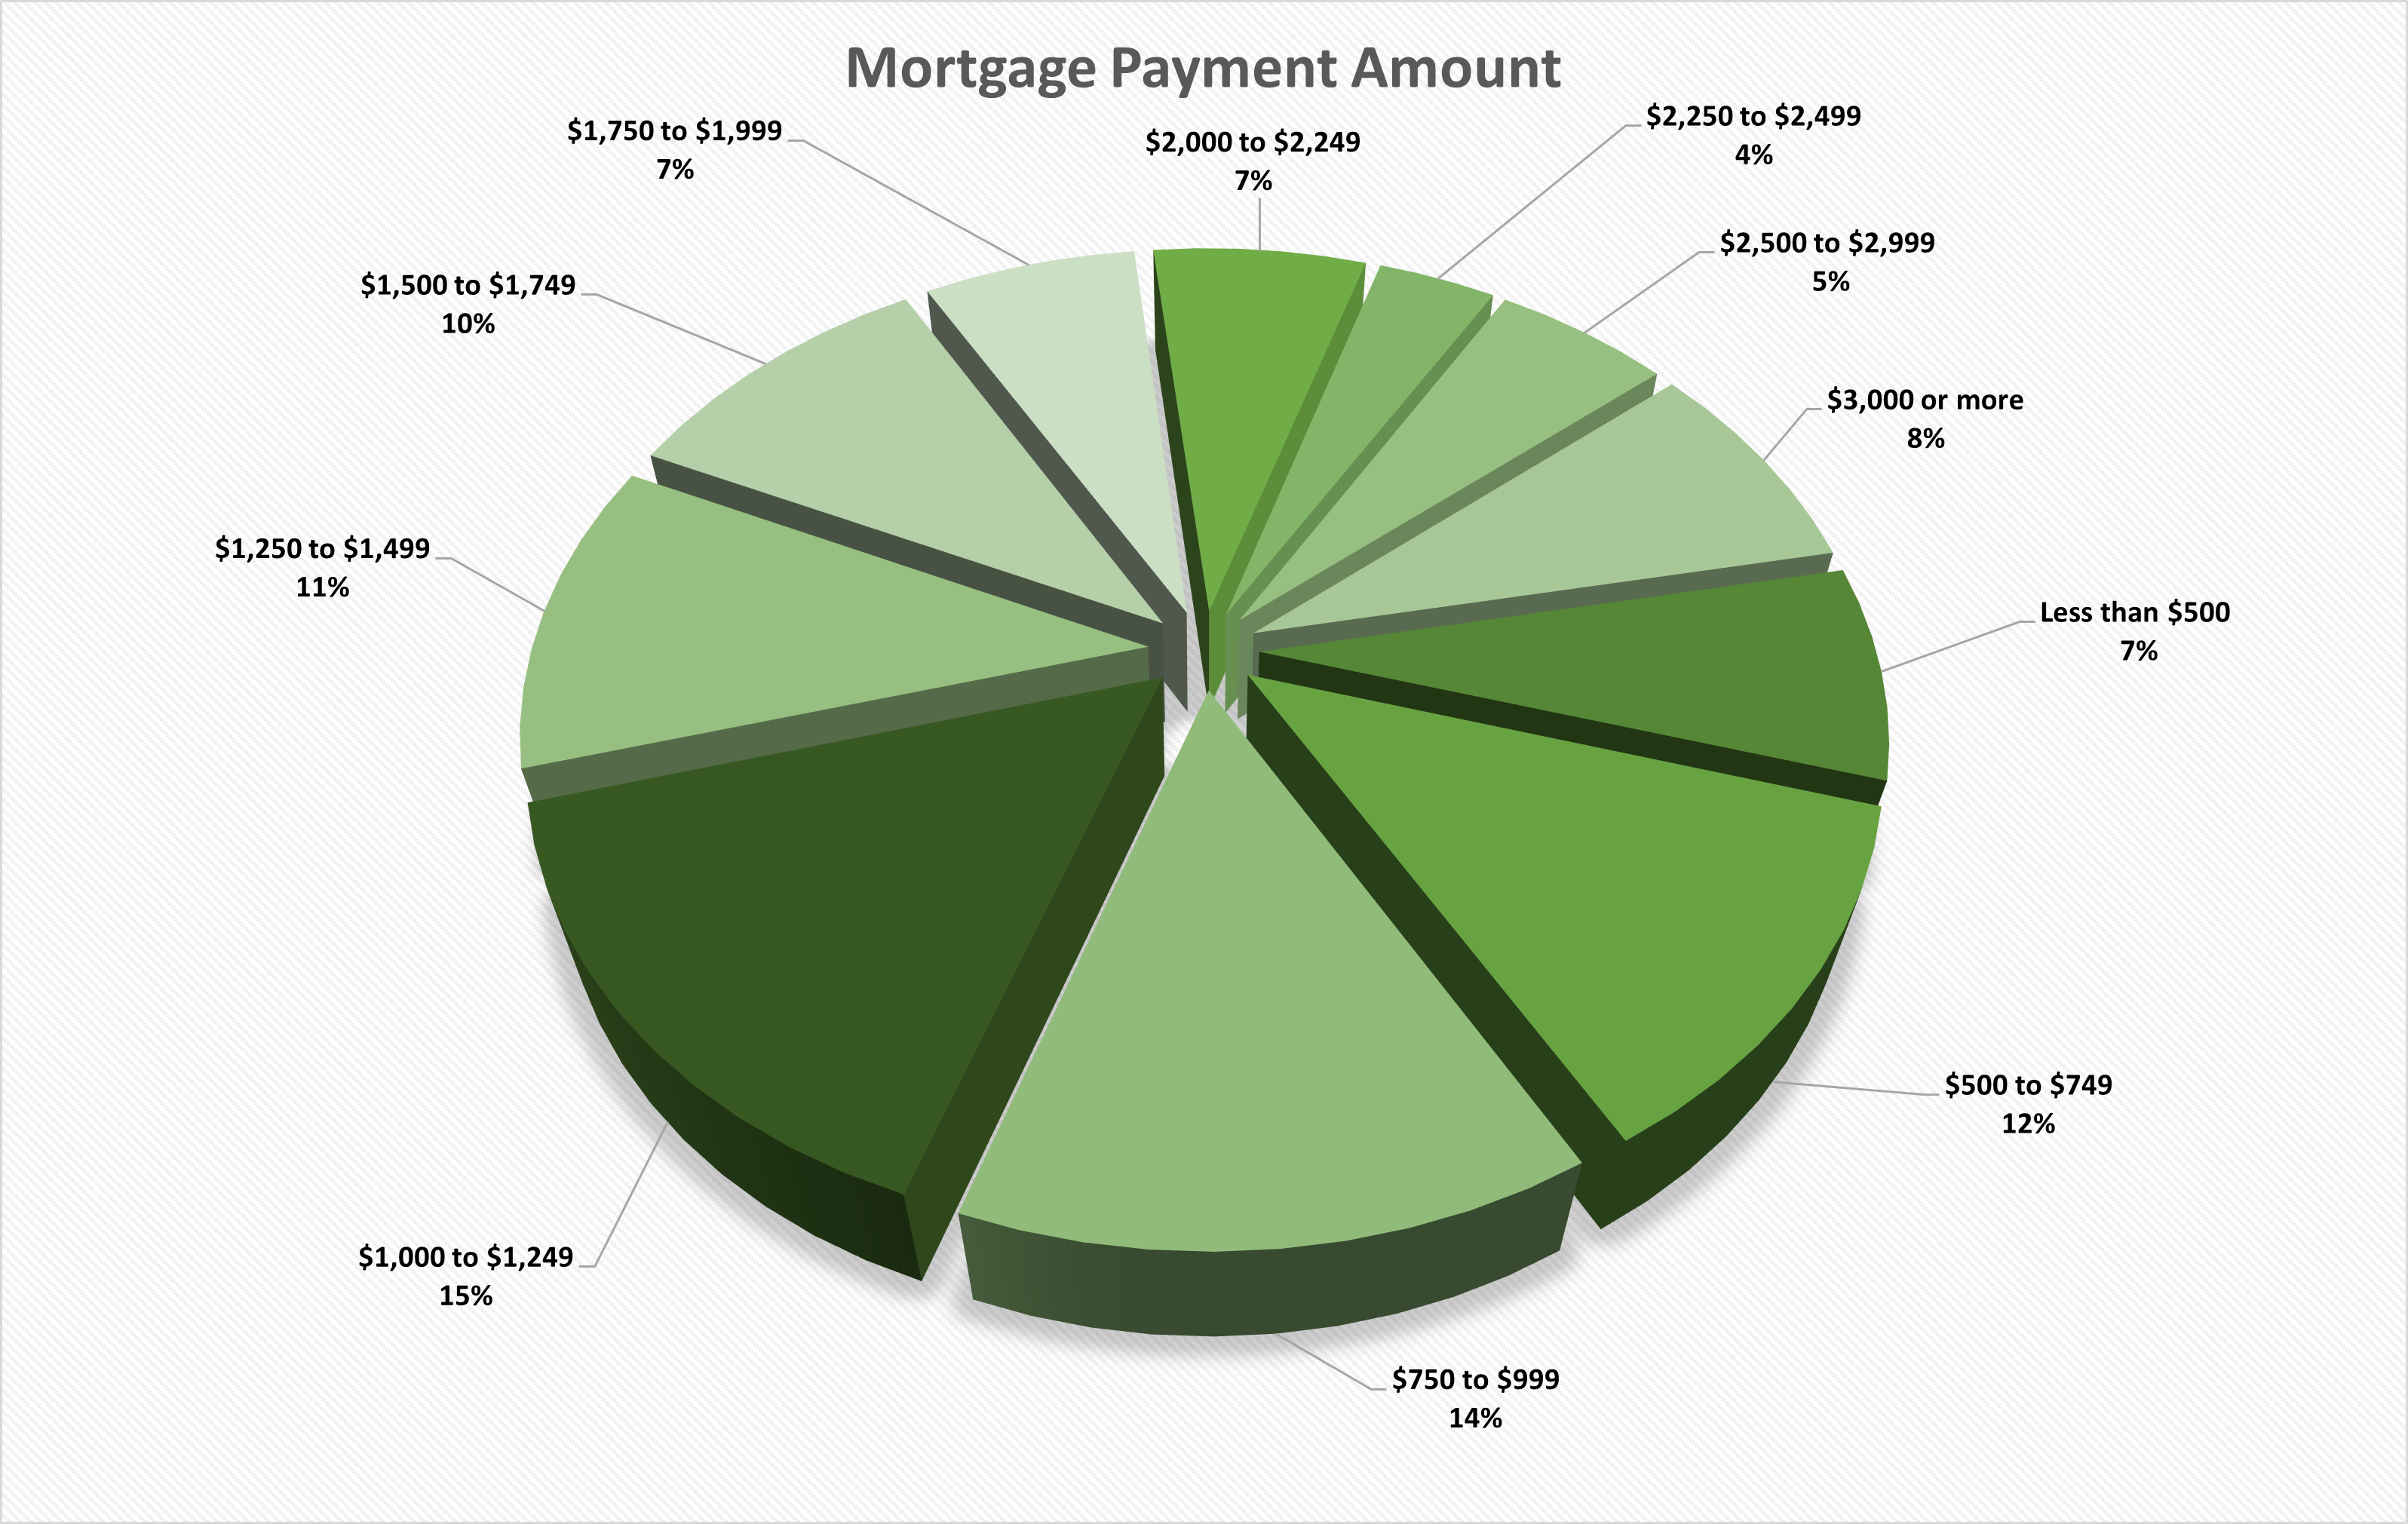 Mortgage Payment Amount